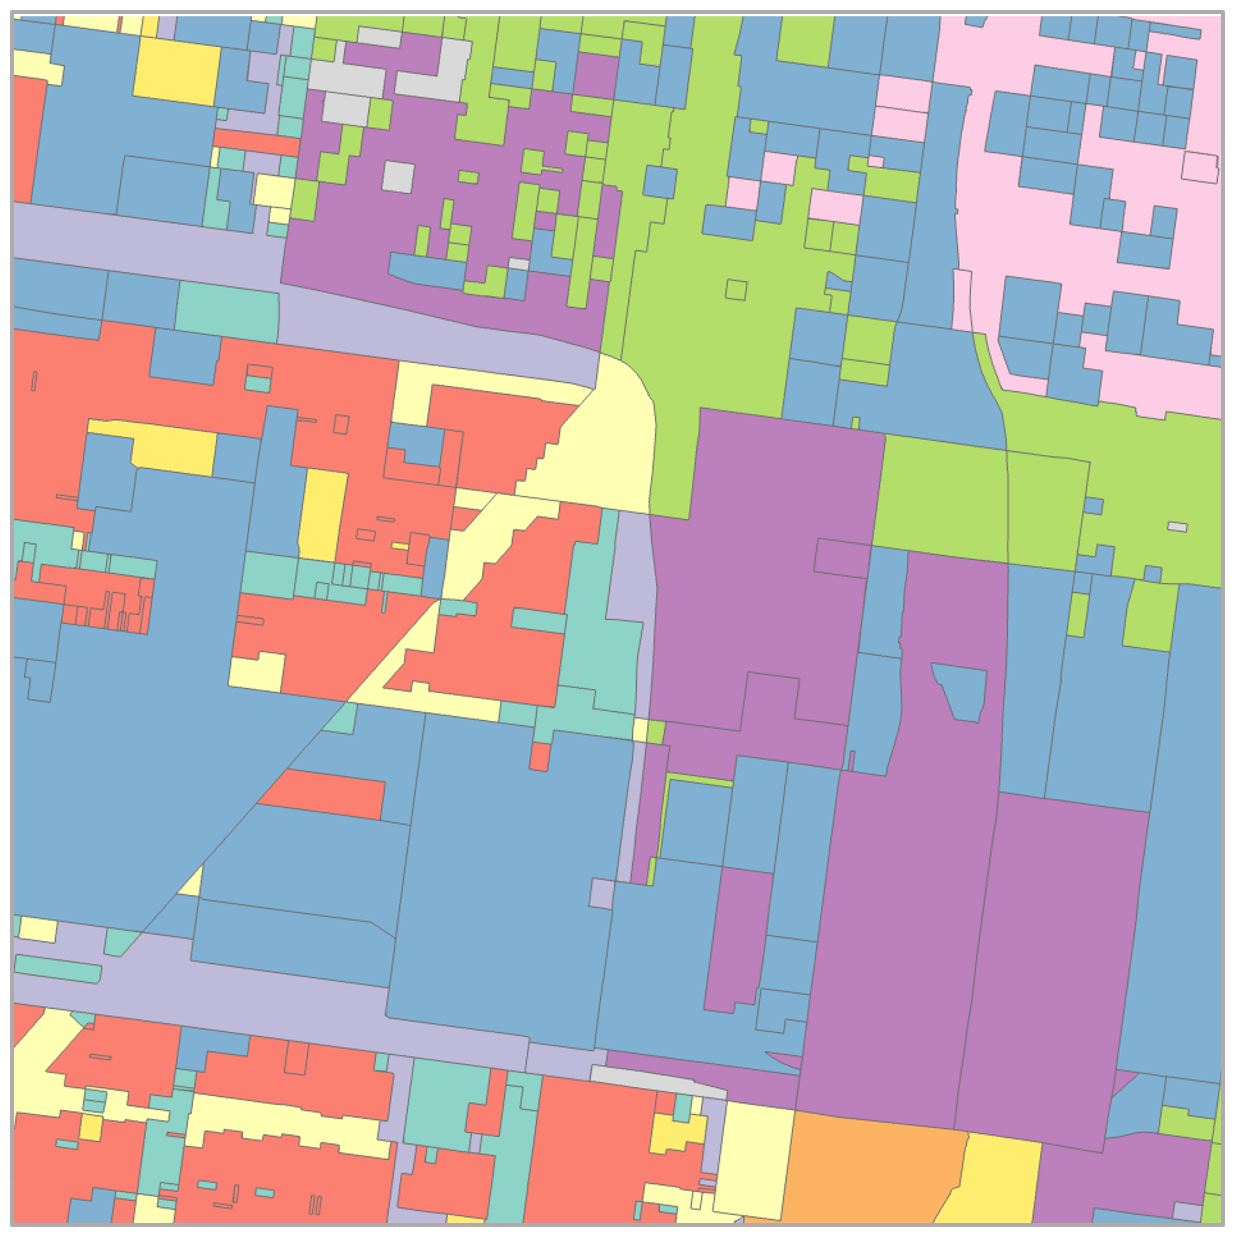 Map of zoning data showing colorful blocks of varying sizes